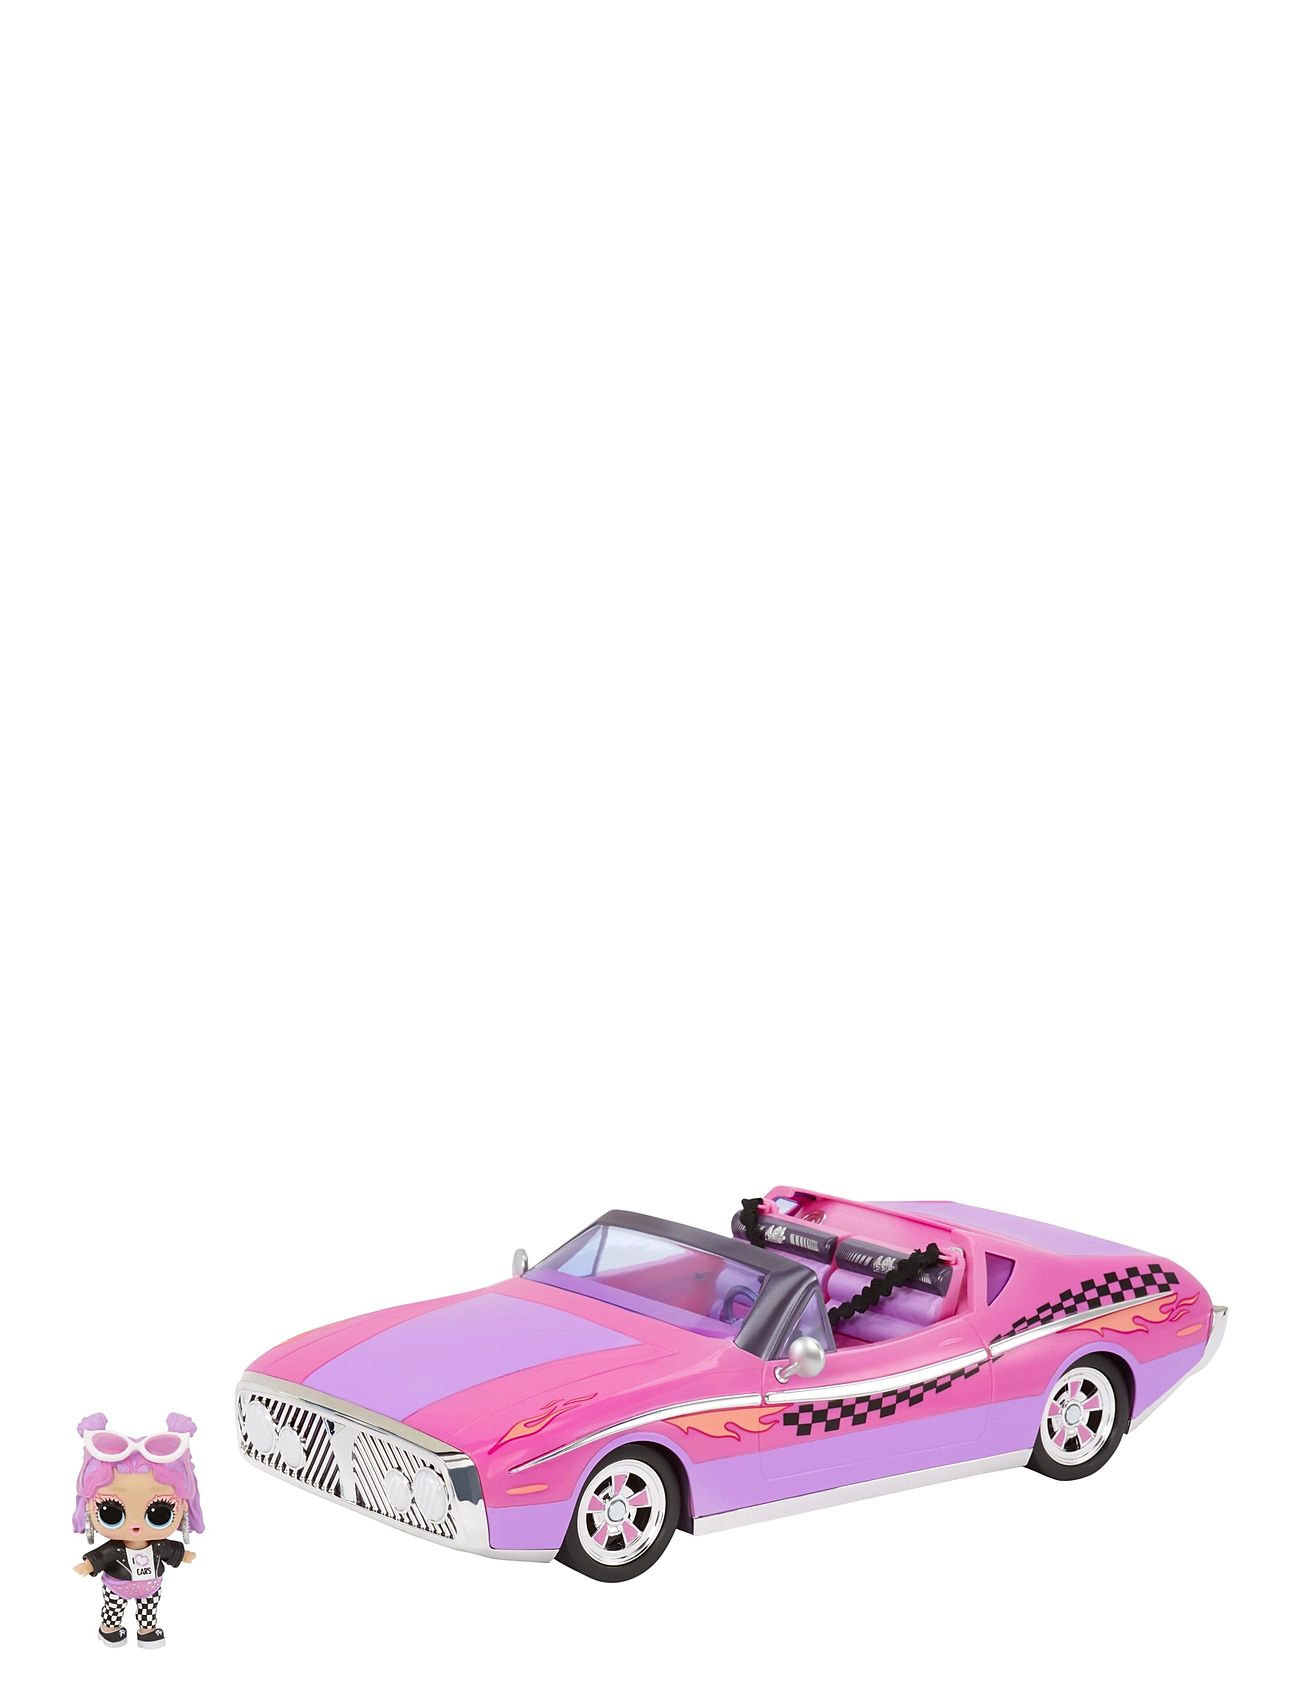 L.o.l. City Cruiser Inkl. 1 Exclusive Omg Doll Toys Toy Cars & Vehicles Toy Cars Multi/patterned L.O.L